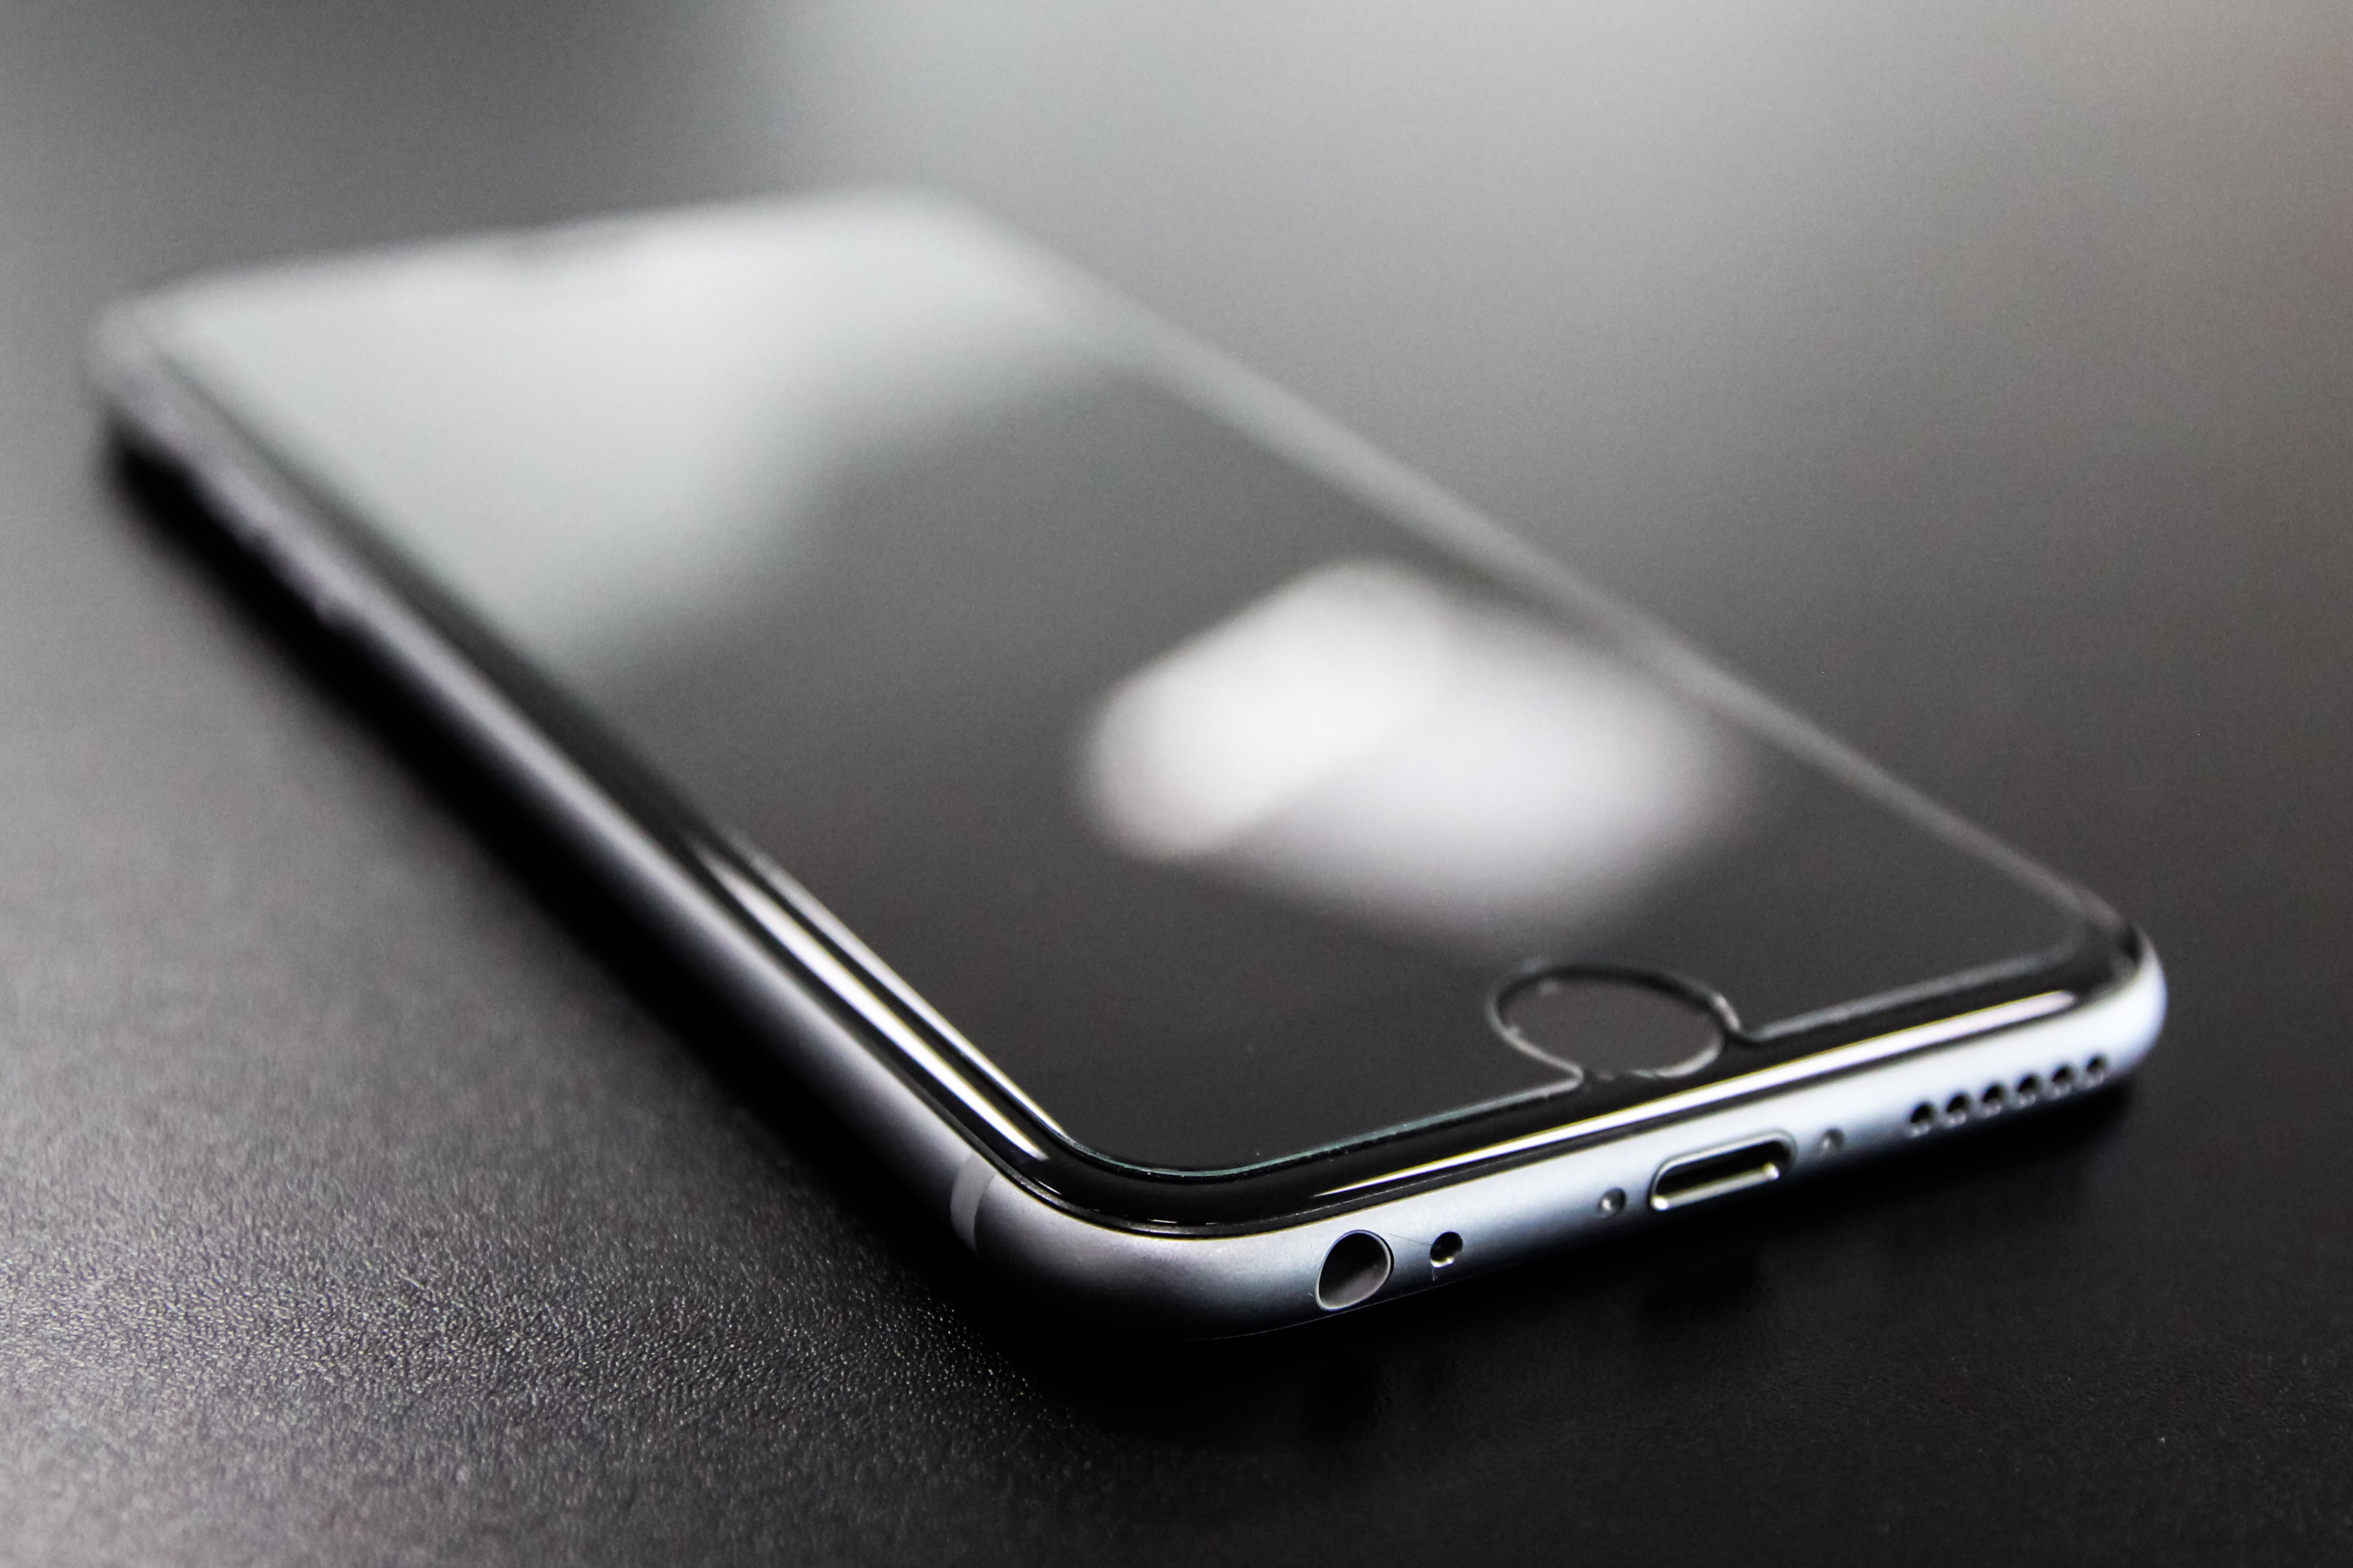 space gray iPhone 6 close-up photo